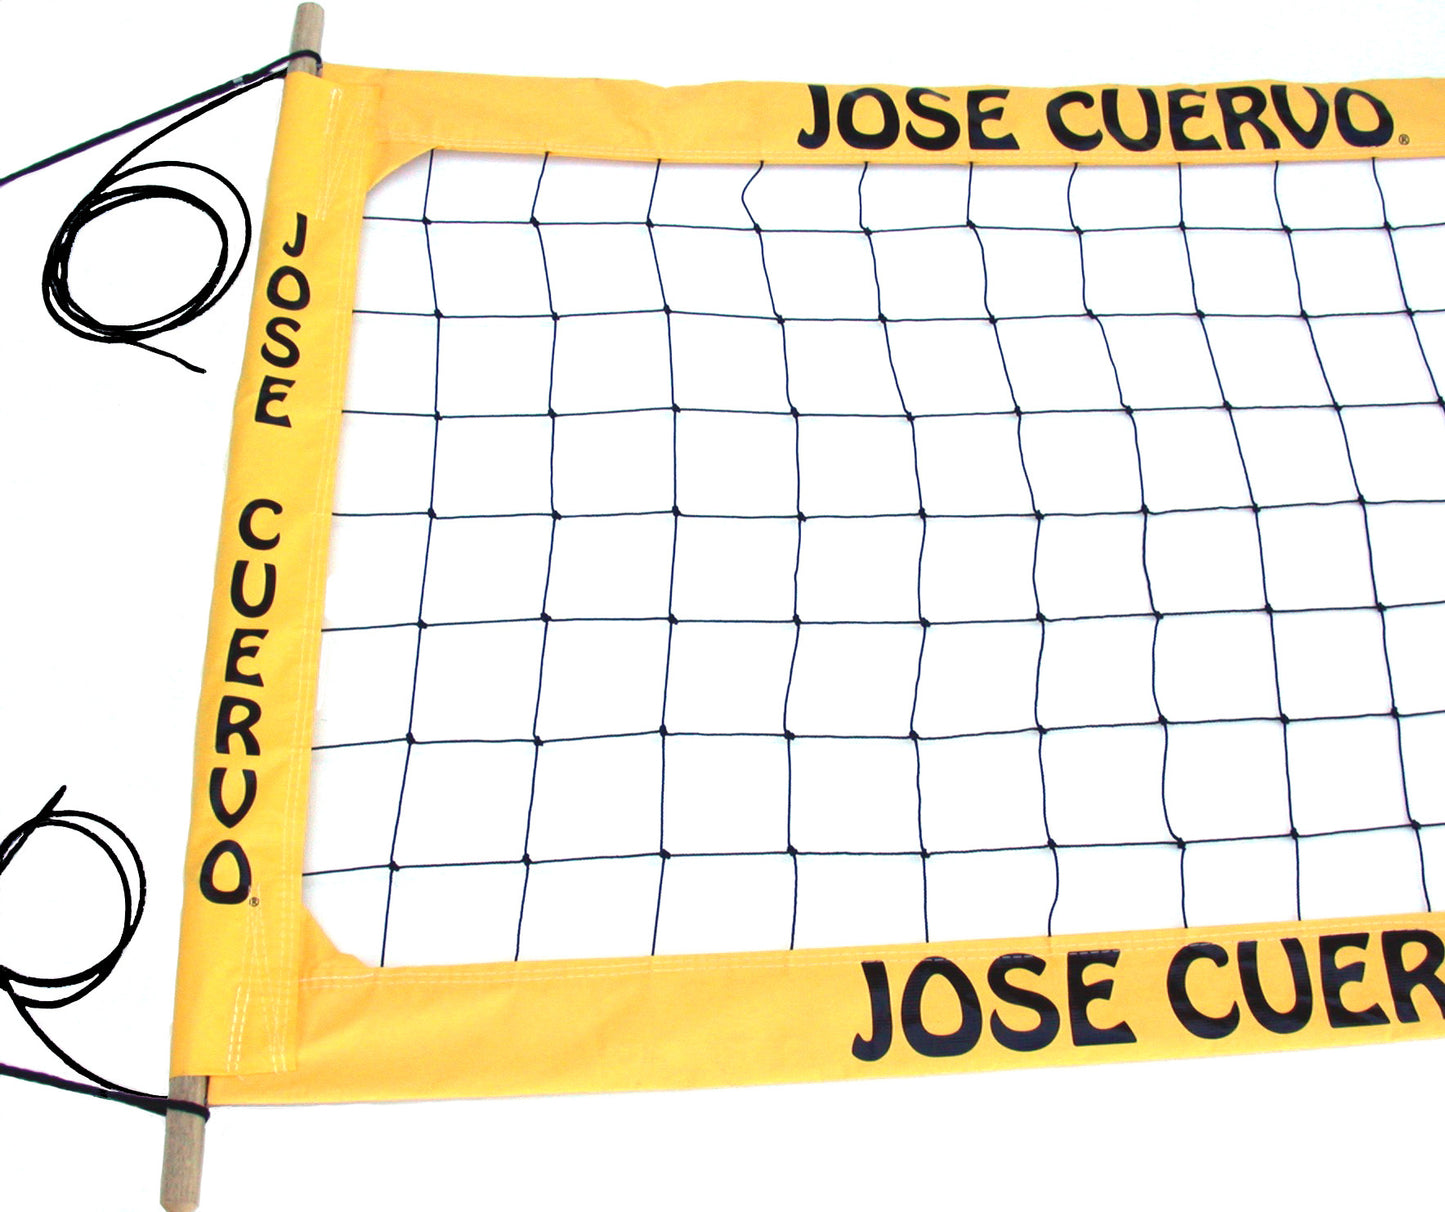 JCPROK-Jose Cuevo Professional Volleyball  Net, Kevlar/Polyester Rope Top and Bottom, 4-inch Yellow Tapes